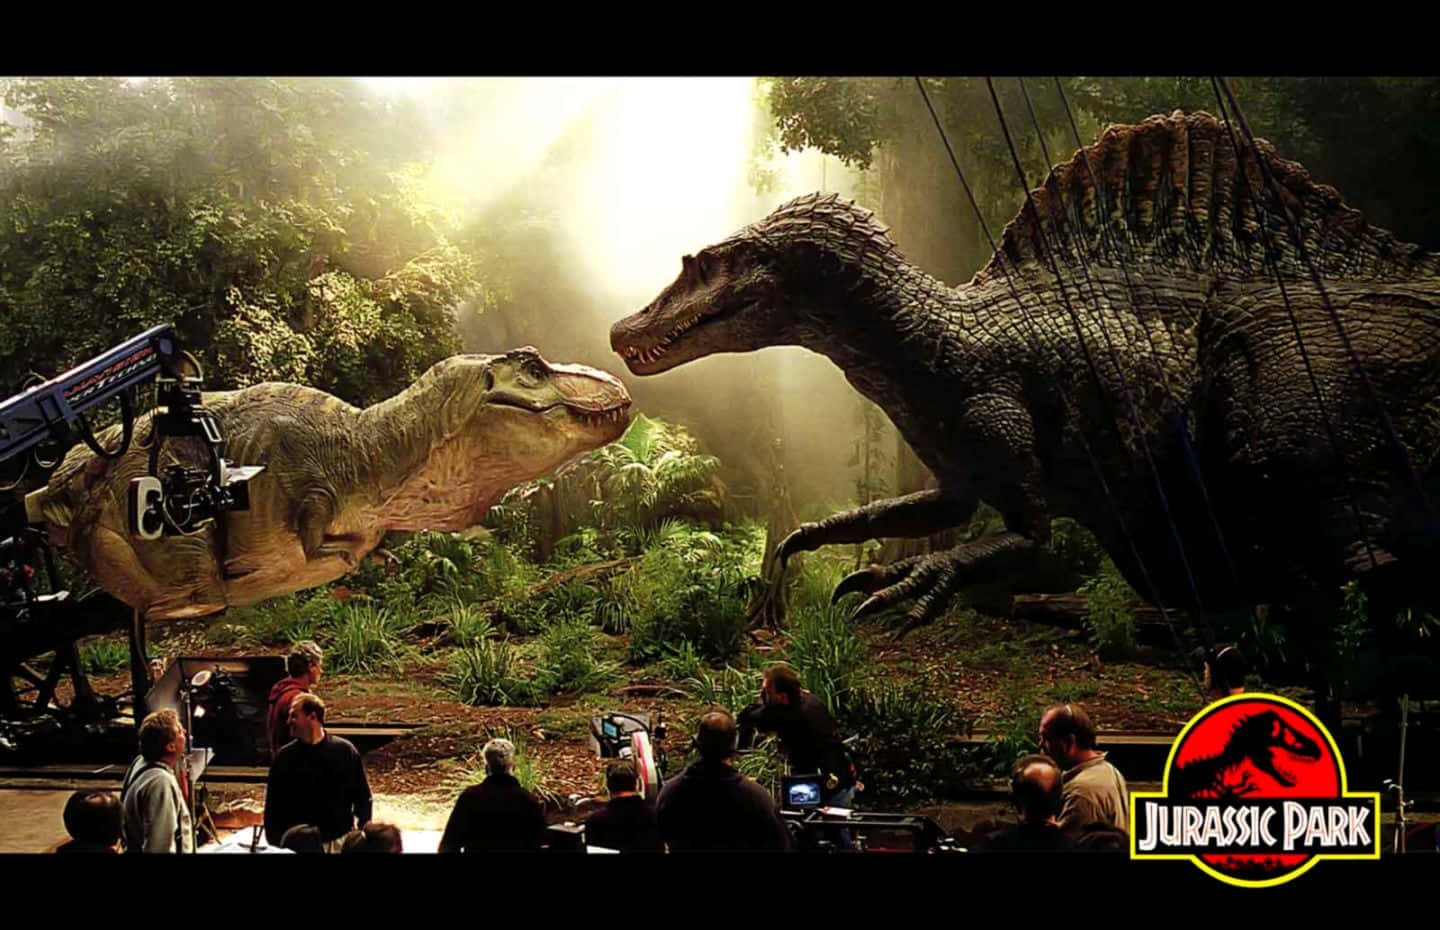 Follow the footsteps of dinosaurs and explore the wilds of Jurassic World